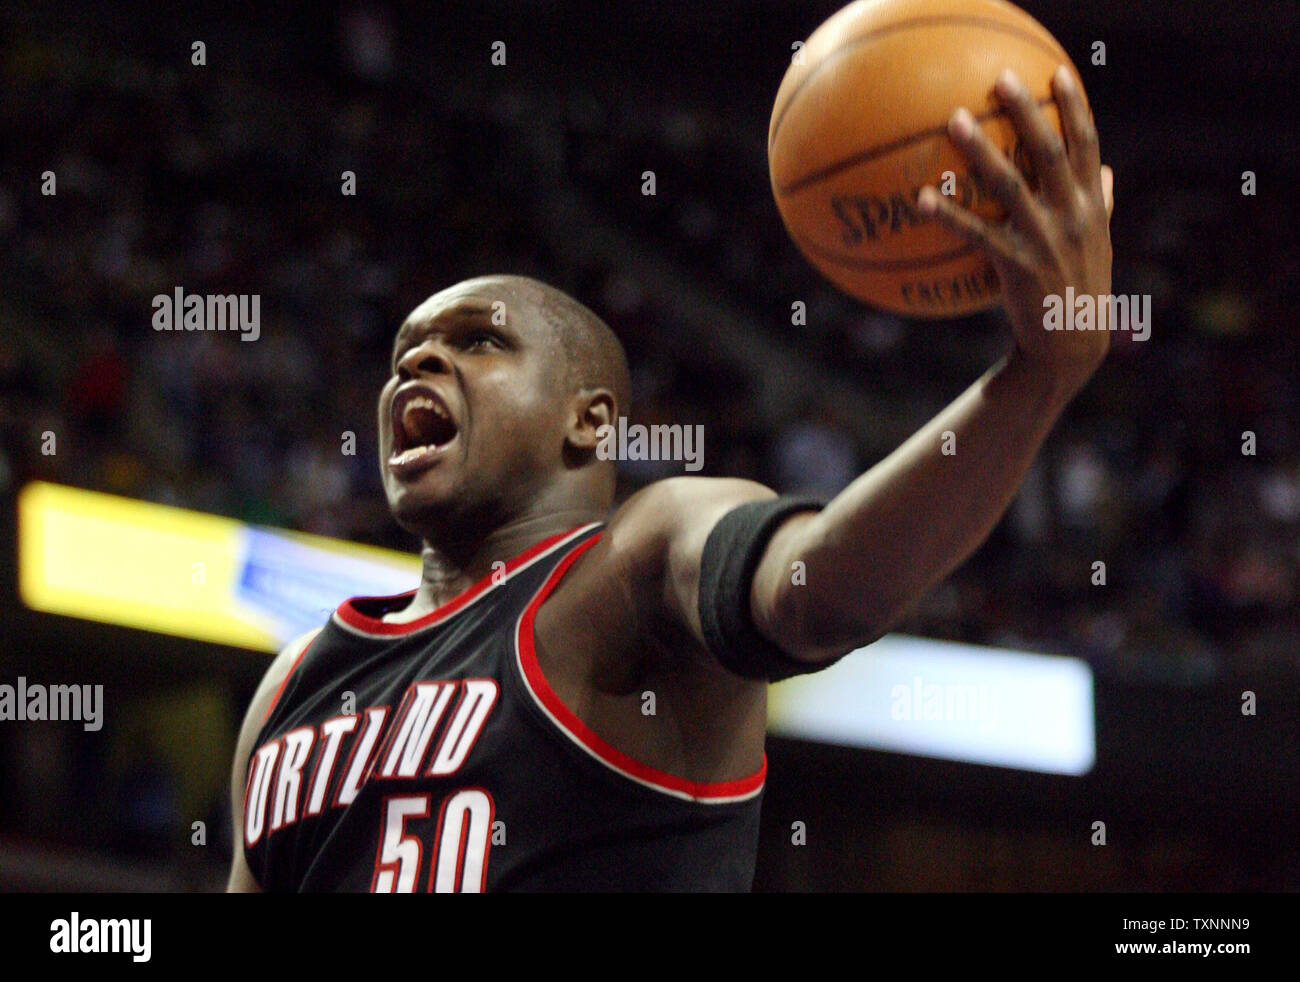 Portland Trail Blazers forward Zach Randolph (50) goes for a layup in the second quarter against the Detroit Pistons December 20, 2005 at The Palace of Auburn Hills, Michigan.  (UPI Photo/Scott R. Galvin) Stock Photo